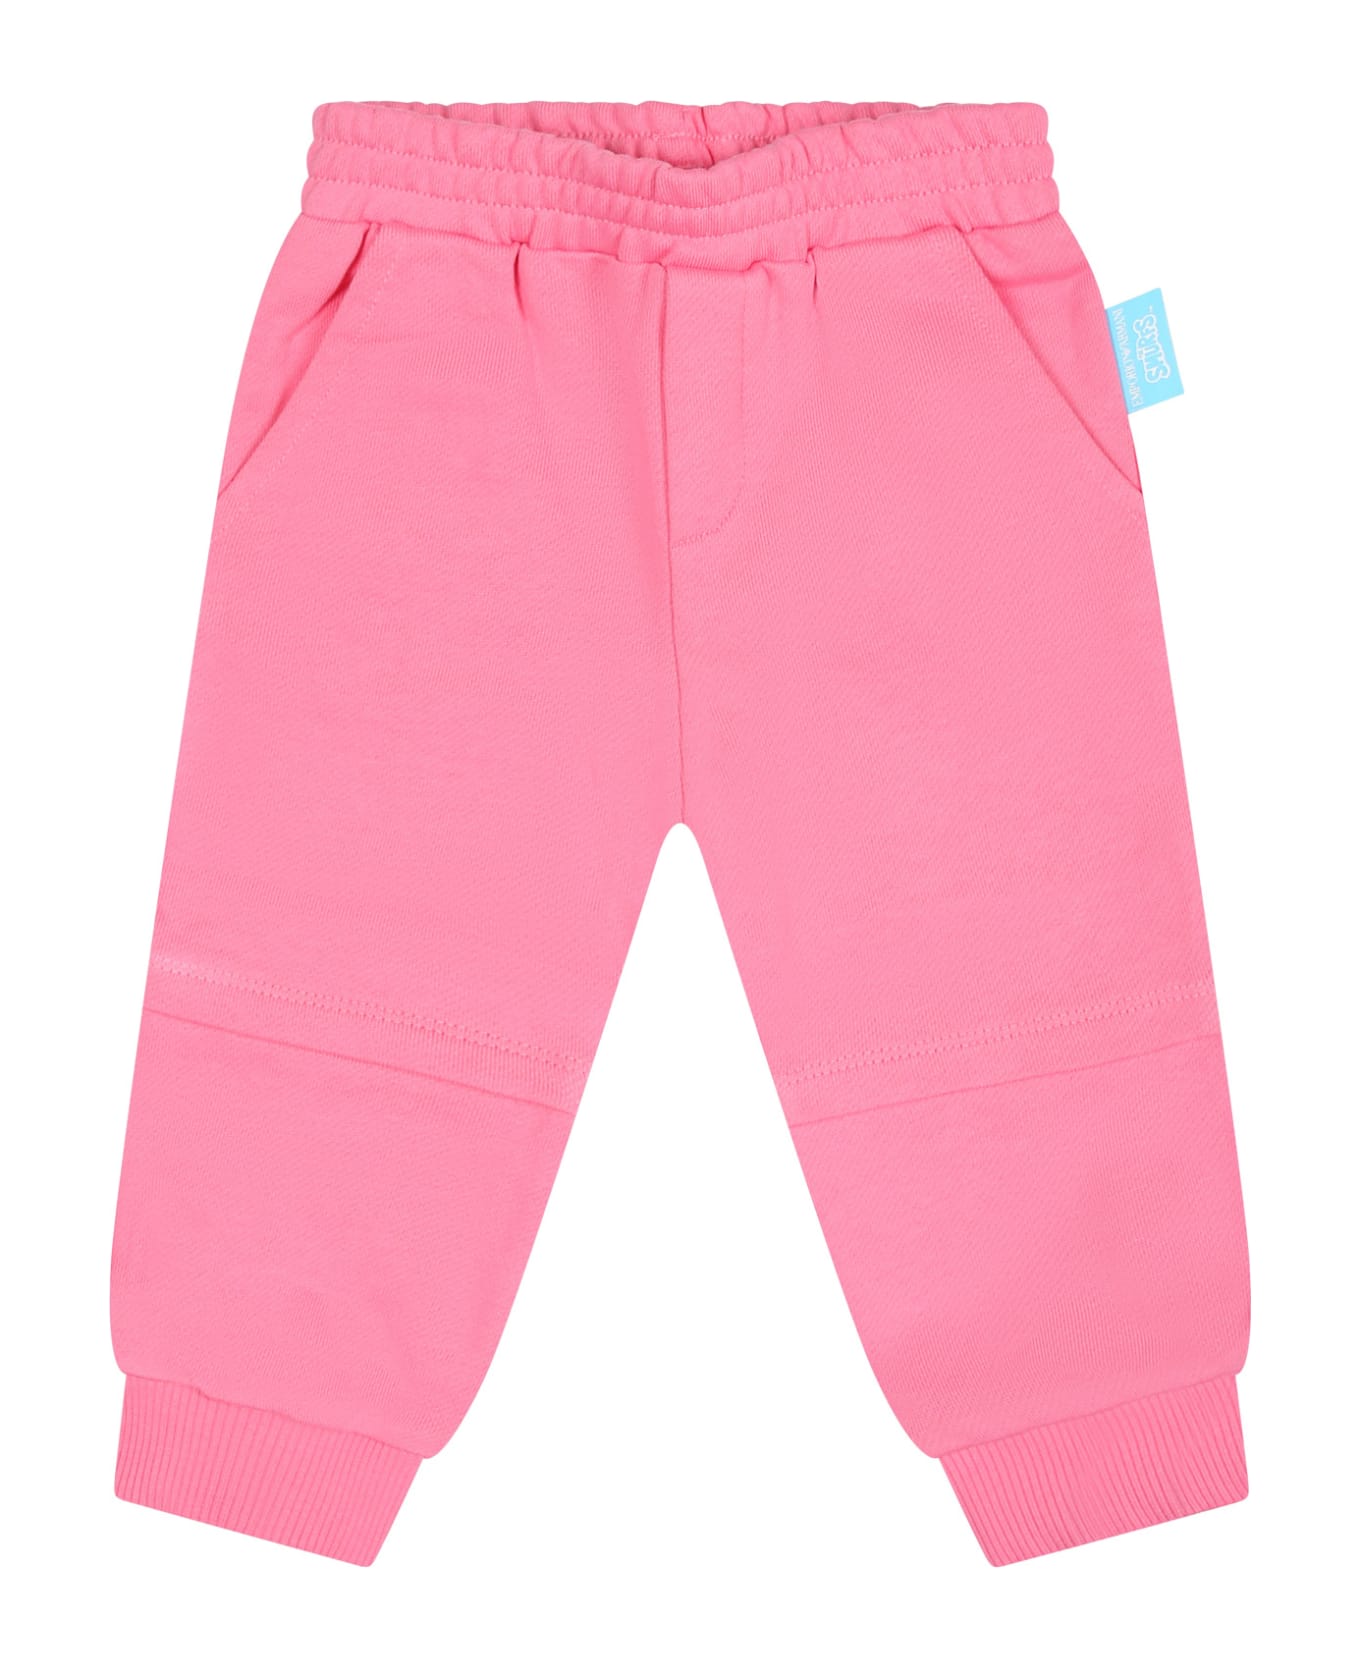 Emporio Armani Pink Sports Trousers For Baby Girl With The Smurfs - Pink ボトムス